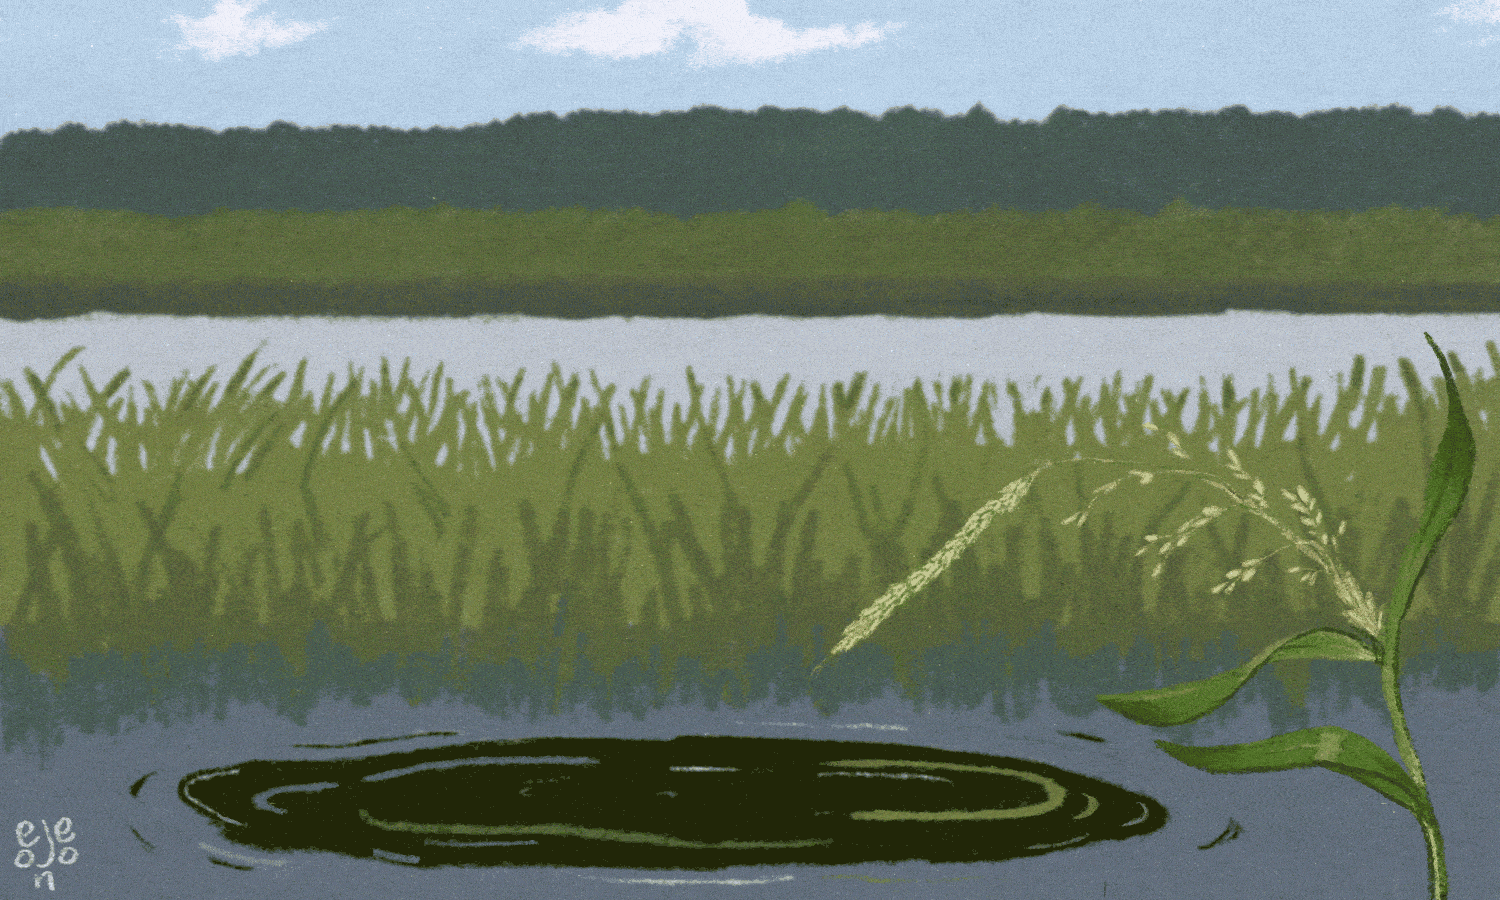 animated illustration of waving wild rice stalk dropping grains into oily water with grasses, water, and trees in the background